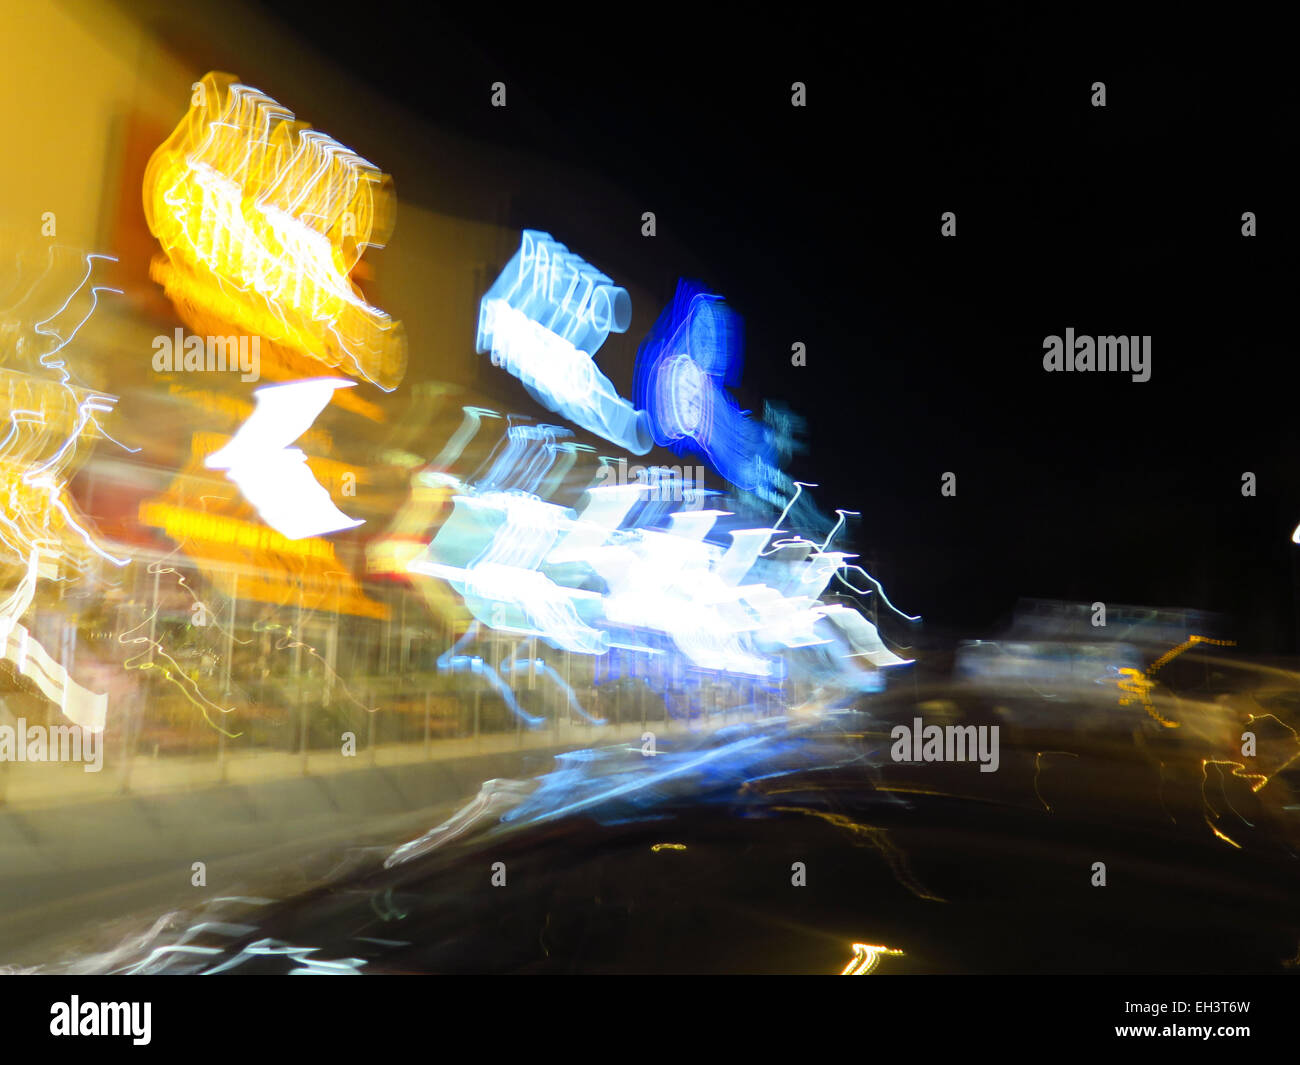 Motion blur of UK restaurant chains at night Stock Photo